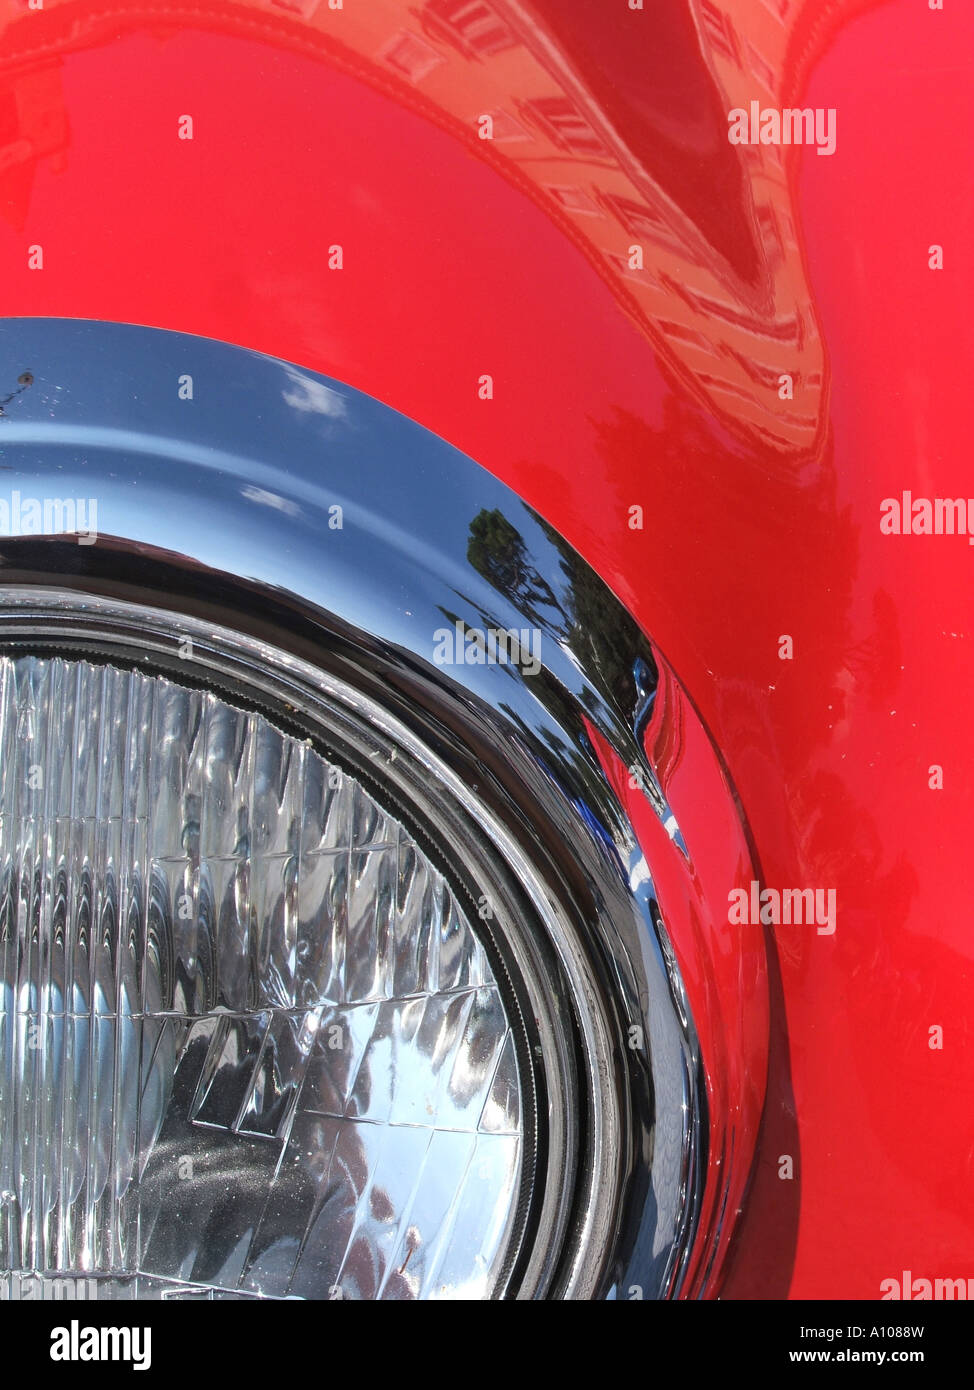 detail of red classic mercedes benz car Stock Photo